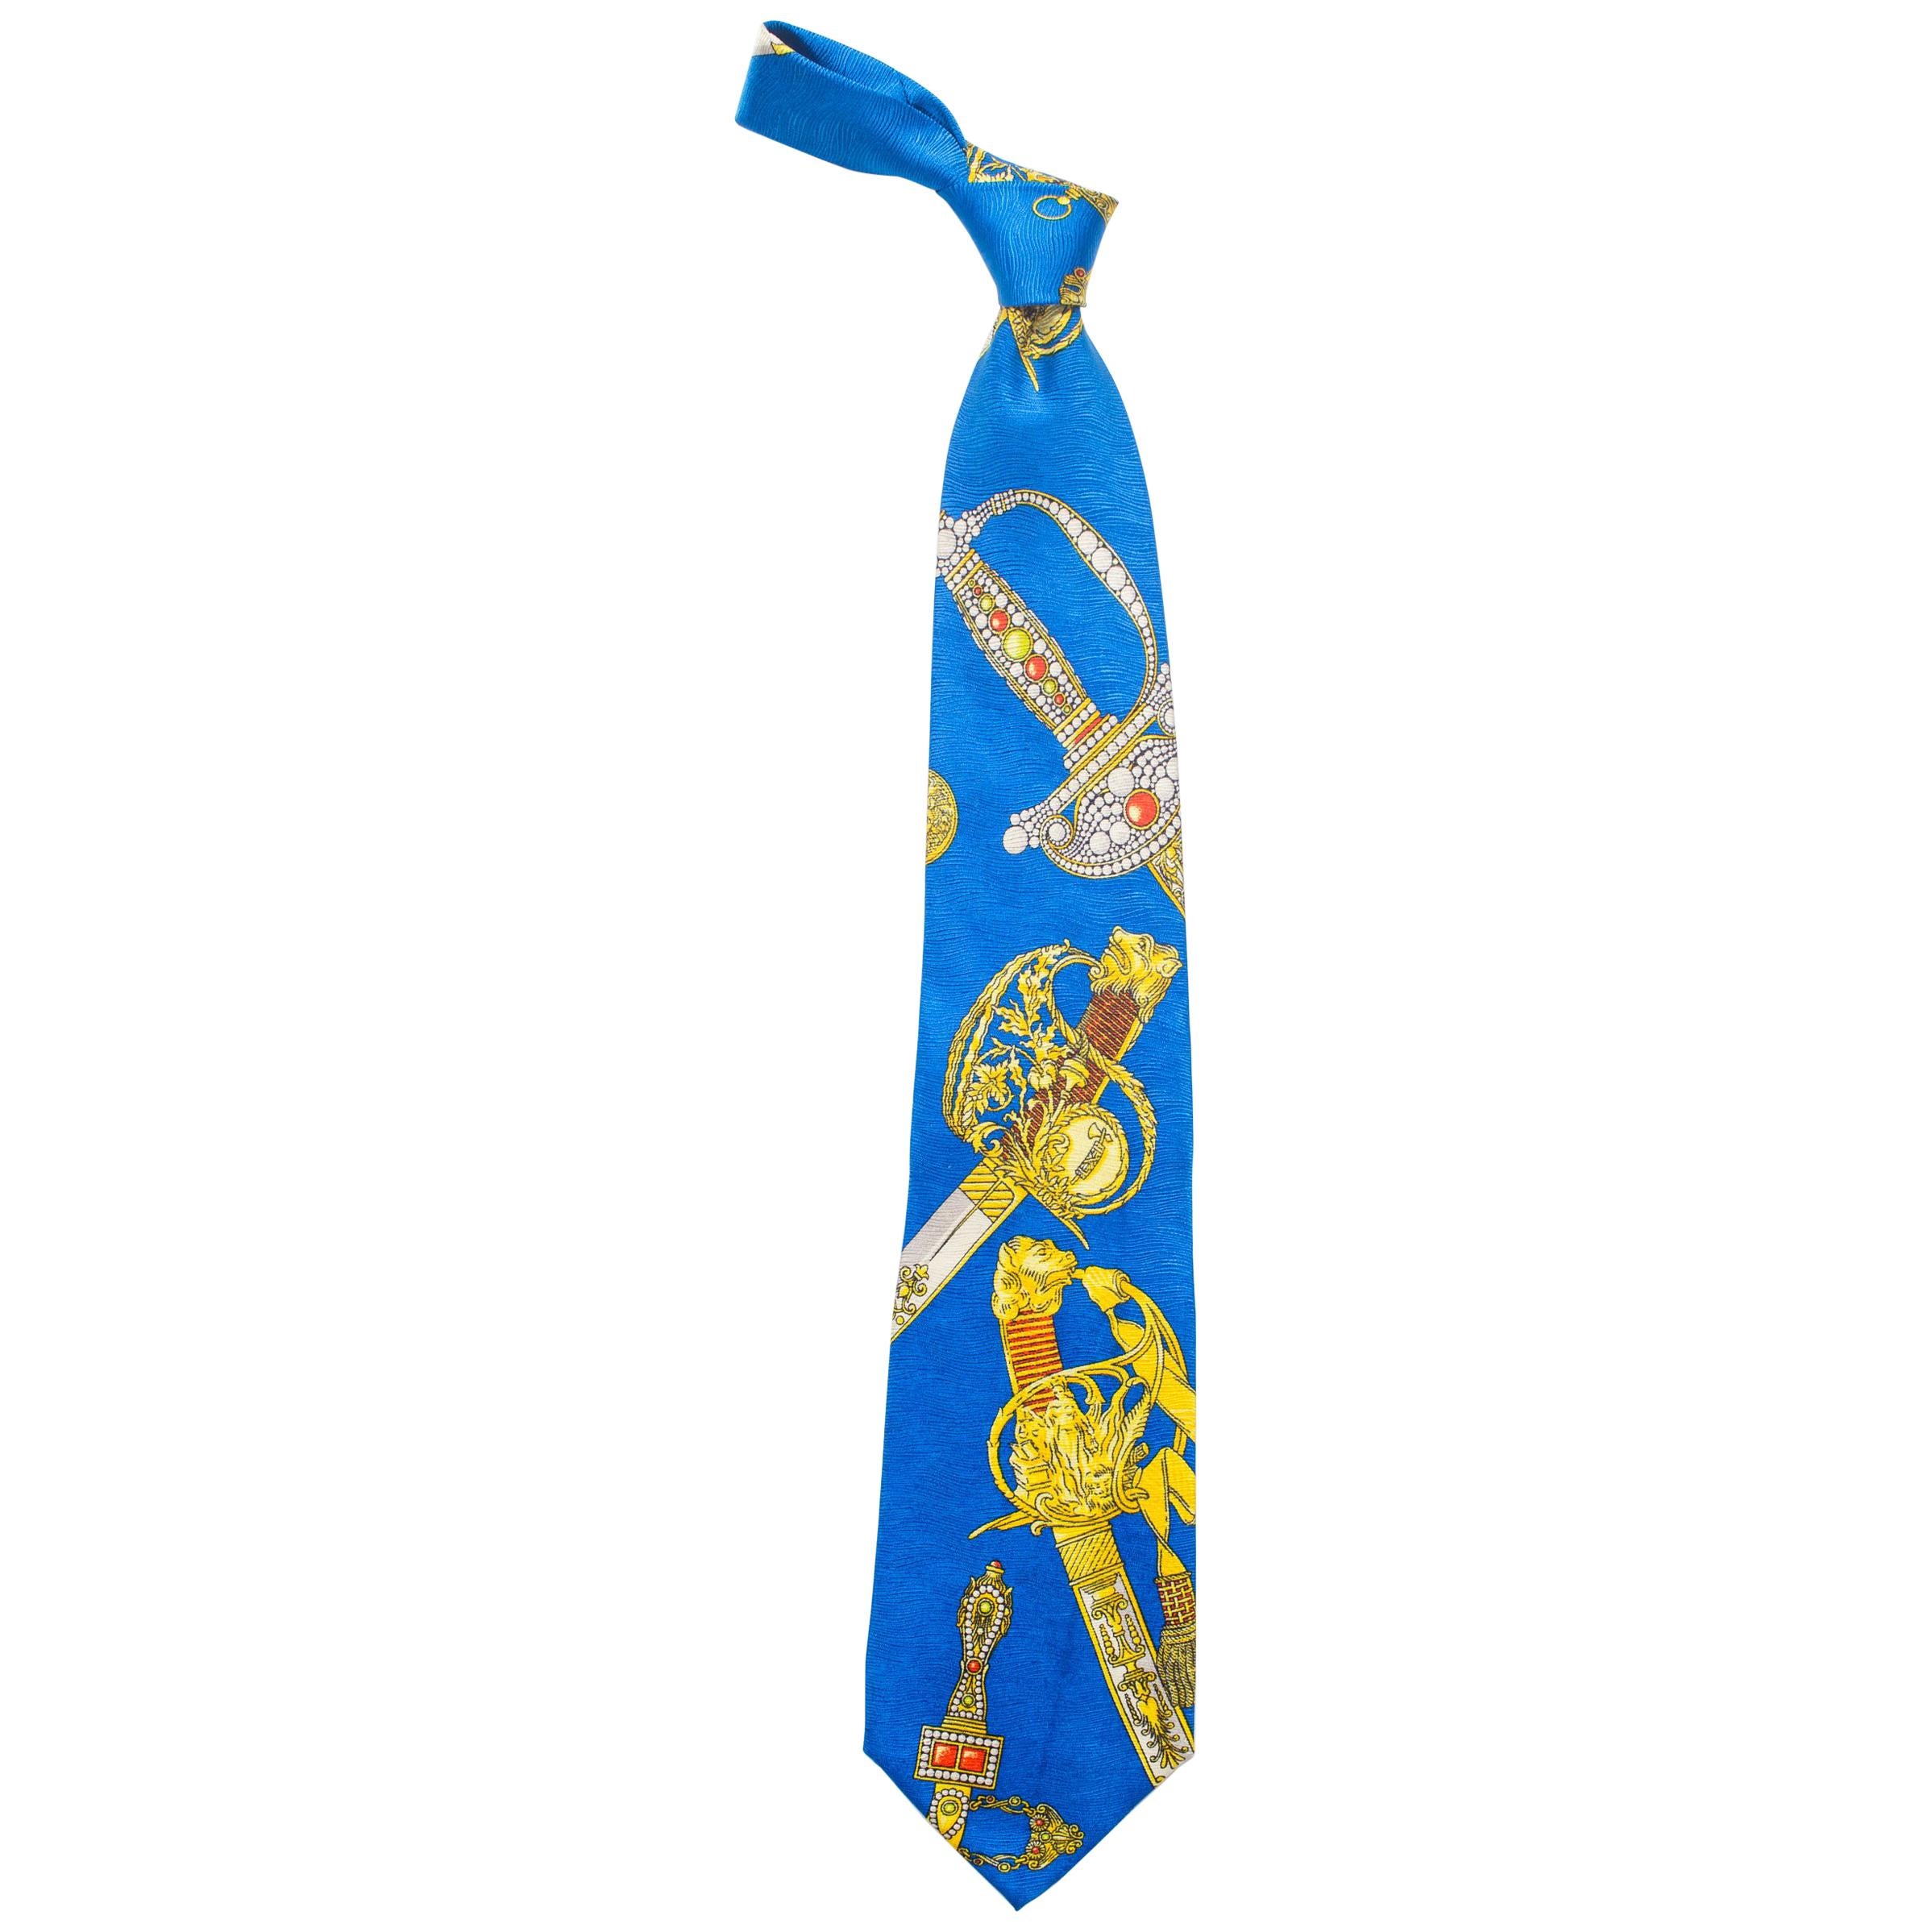 1990s Gianni Versace Bright Blue Mens Silk Tie With Gold Swords